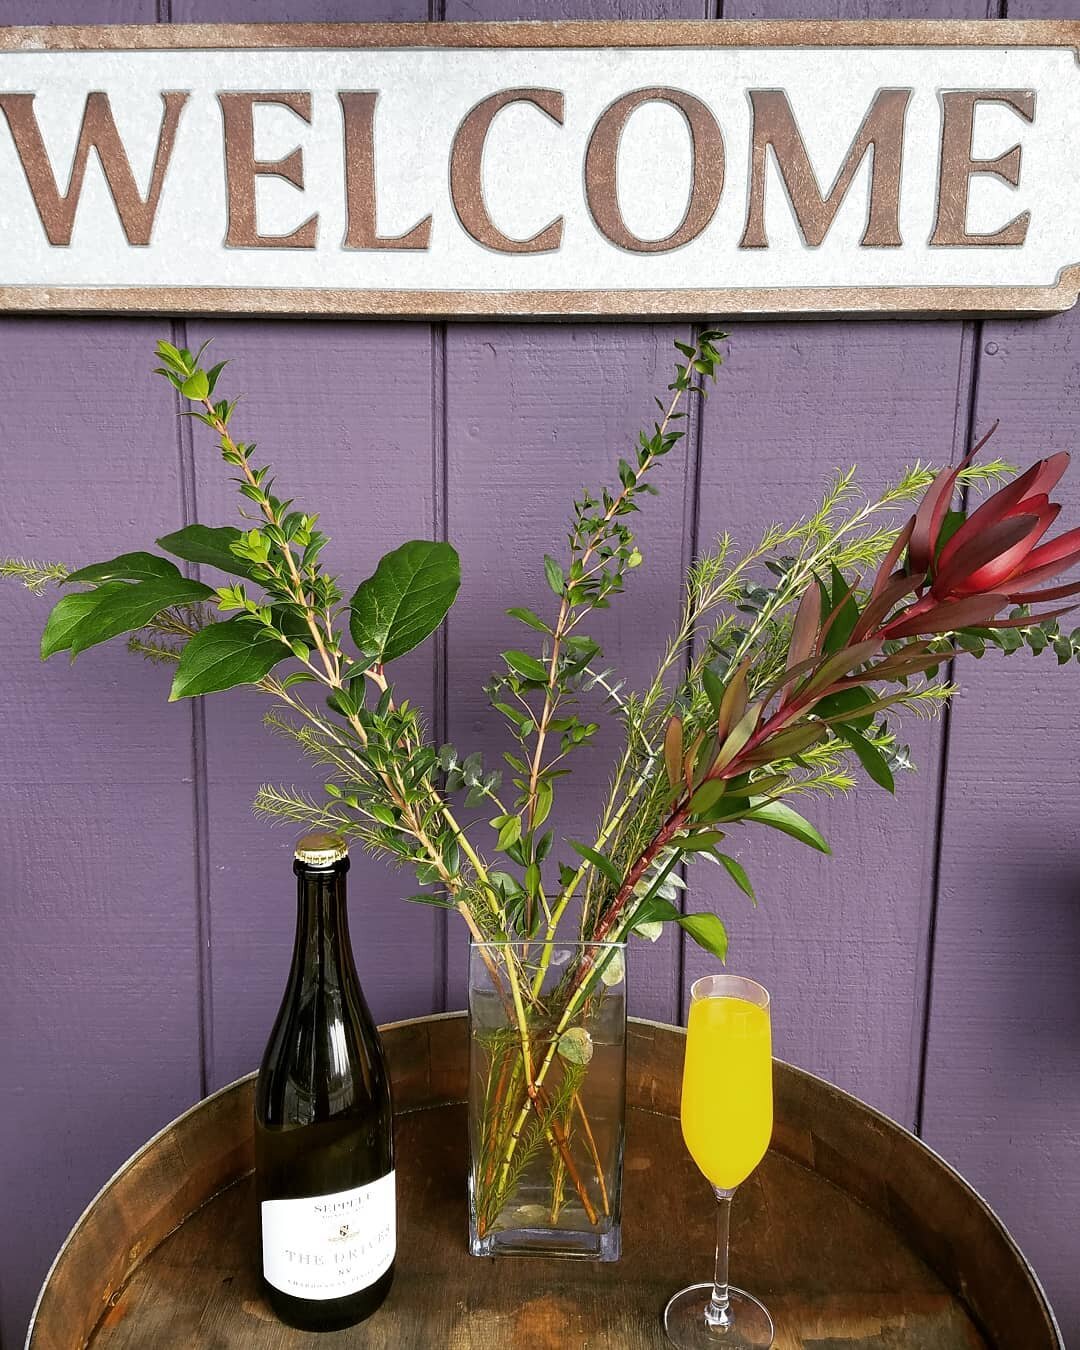 Join us for our MIMOSA HAPPY HOUR 12-3 Sat &amp; Sun. $6 with fresh squeezed orange juice.

☀️ Sunny outdoor seating available.  Open until 8pm tonight.

#thecoastalvine #mimosasaturday #ourwinewillmakeyouawesome #mossbeachcalifornia #seppeltwines #v